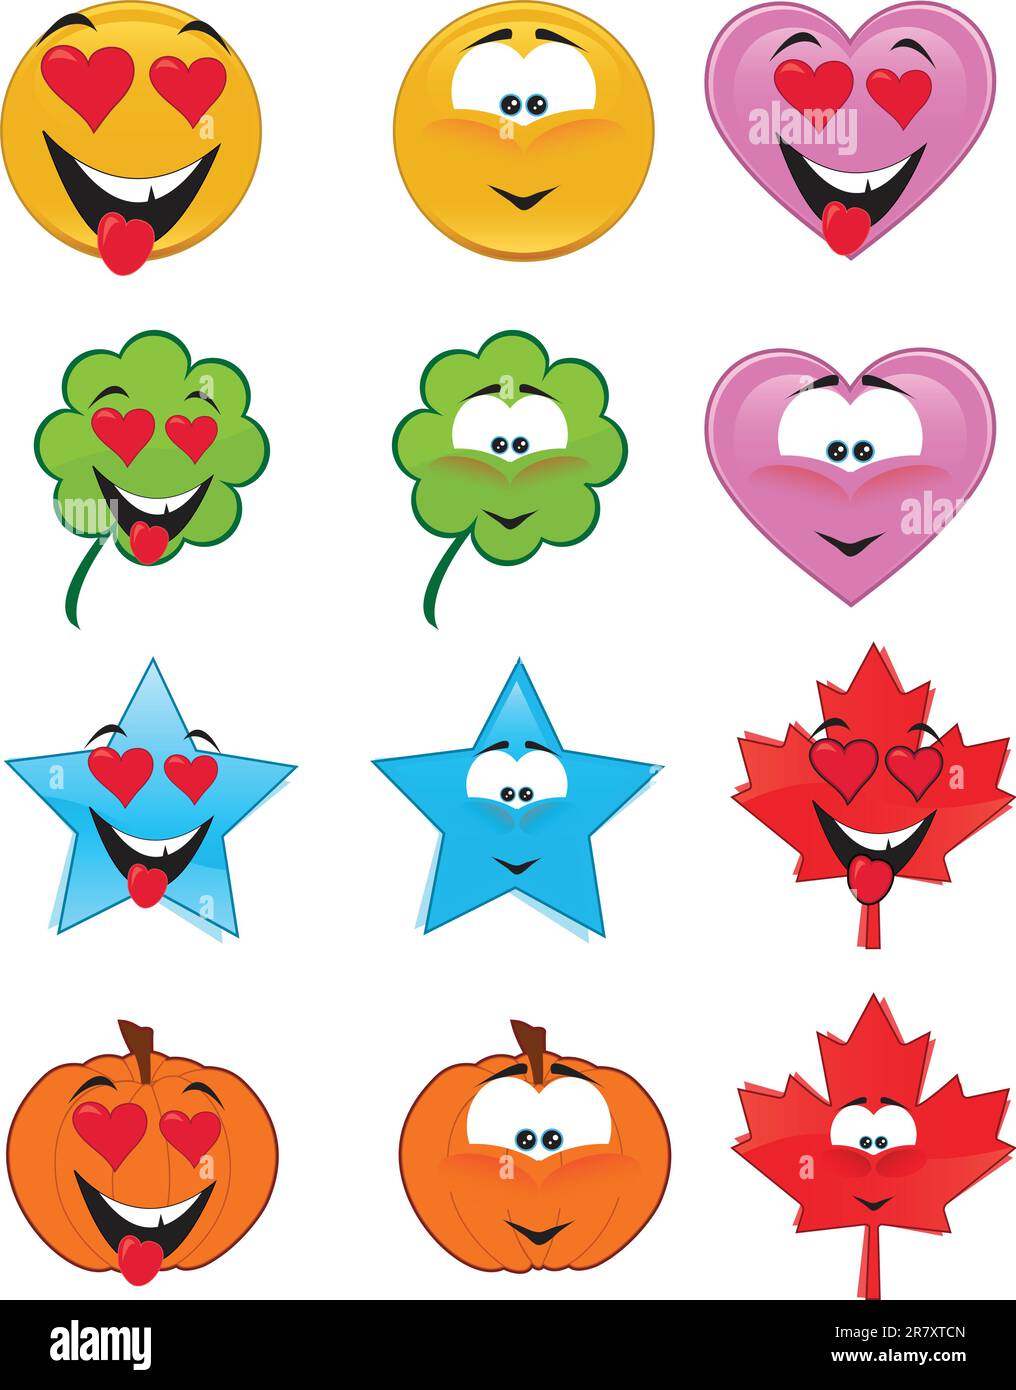 Set of emoticons - St. Valentine's collection - vector illustrations Stock Vector